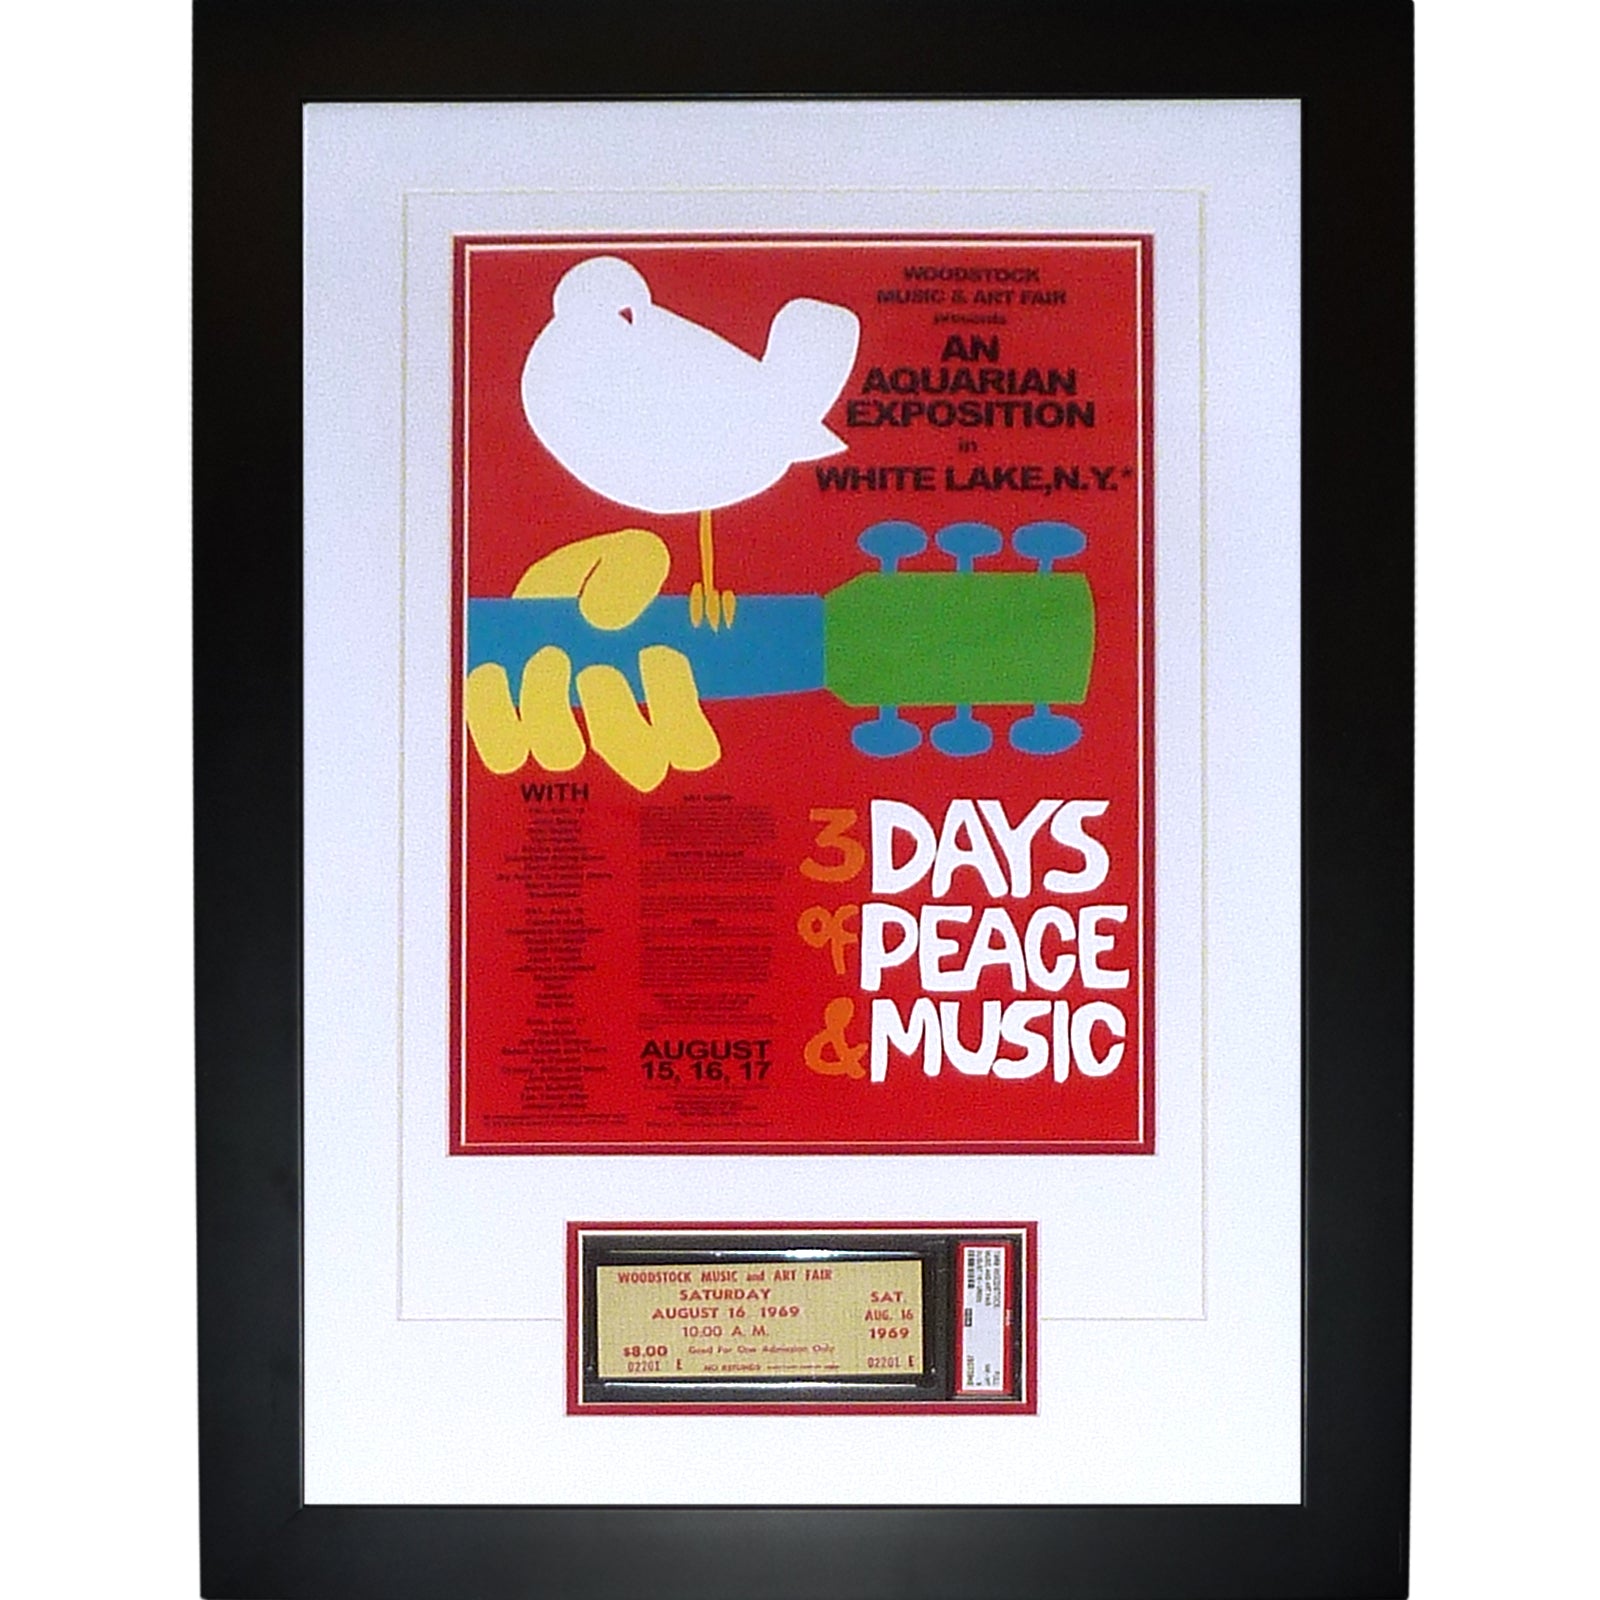 Woodstock Music And Art Fair 12x18 Poster Deluxe Framed with Original Woodstock Ticket - PSADNA Graded